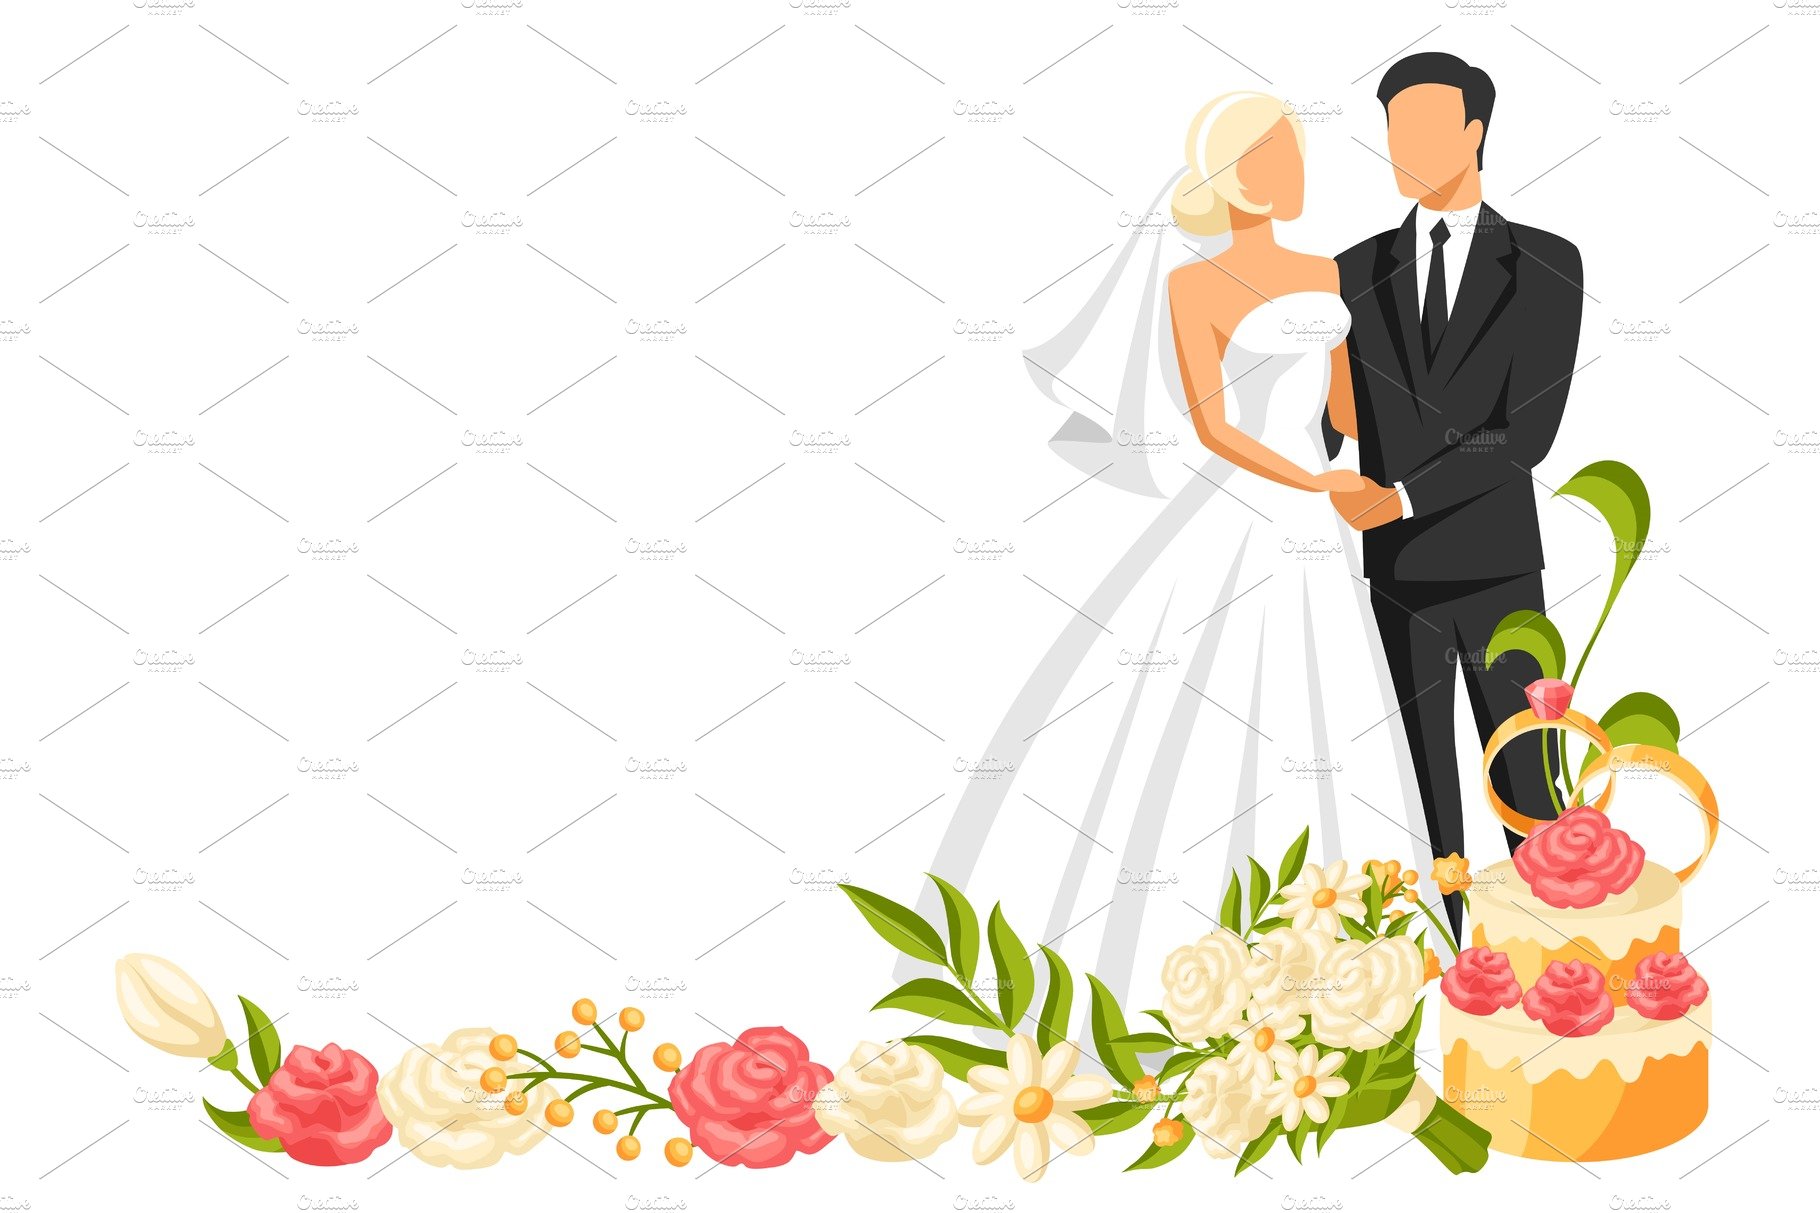 Wedding illustration of bride and cover image.